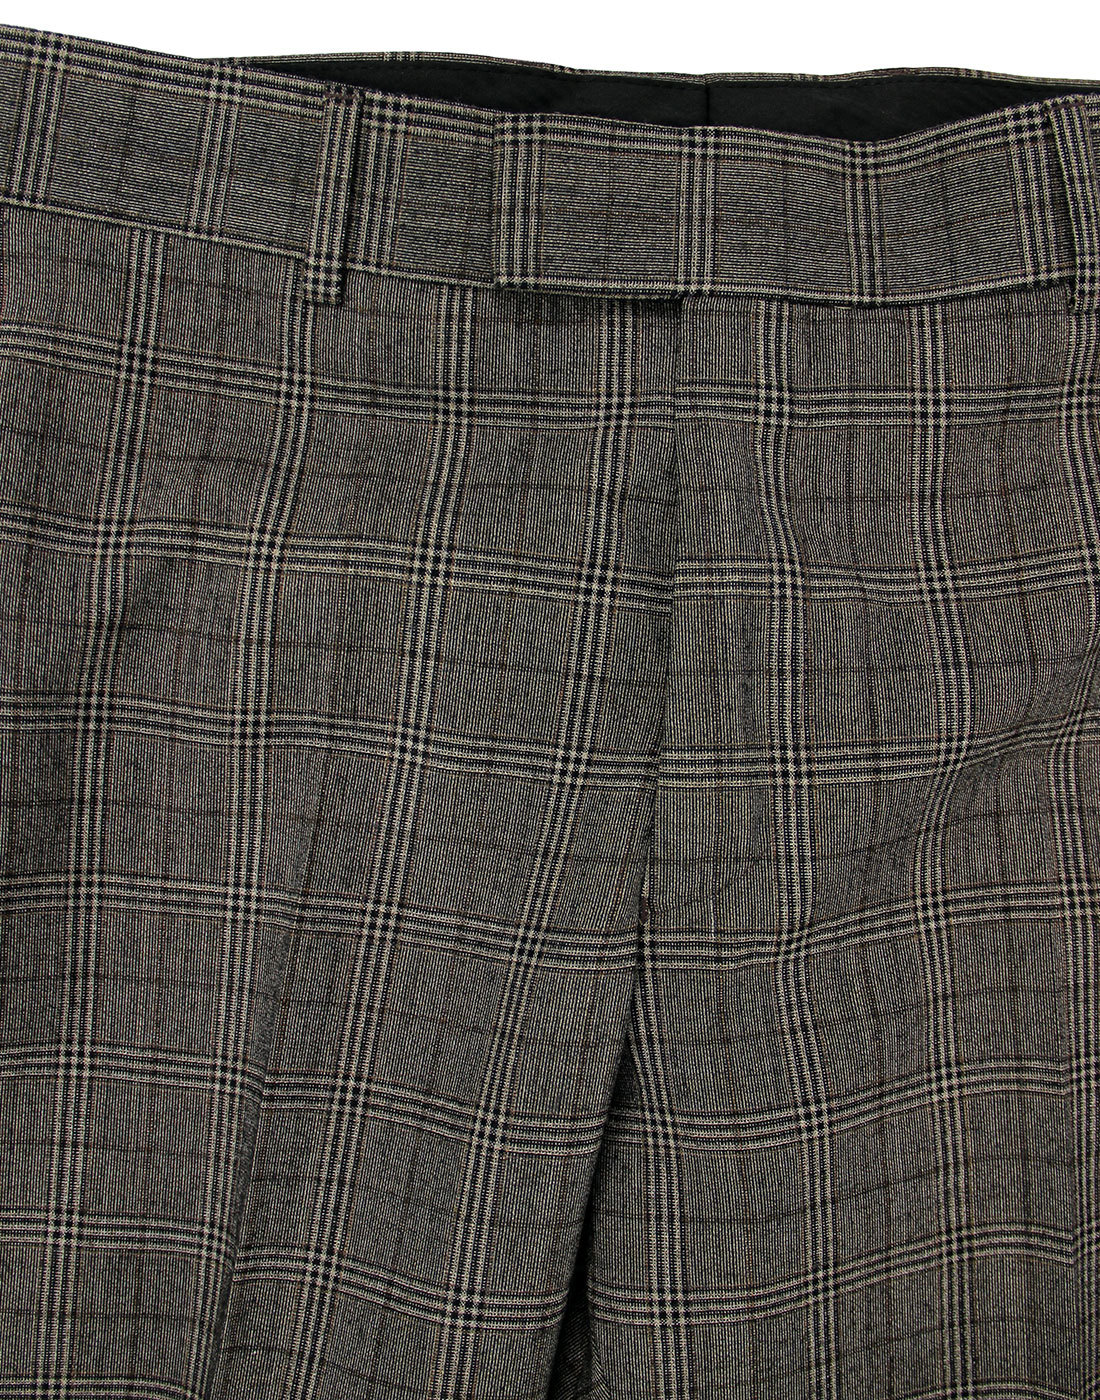 GIBSON LONDON Retro 1960s POW Check Slim Mod Suit Trousers Taupe